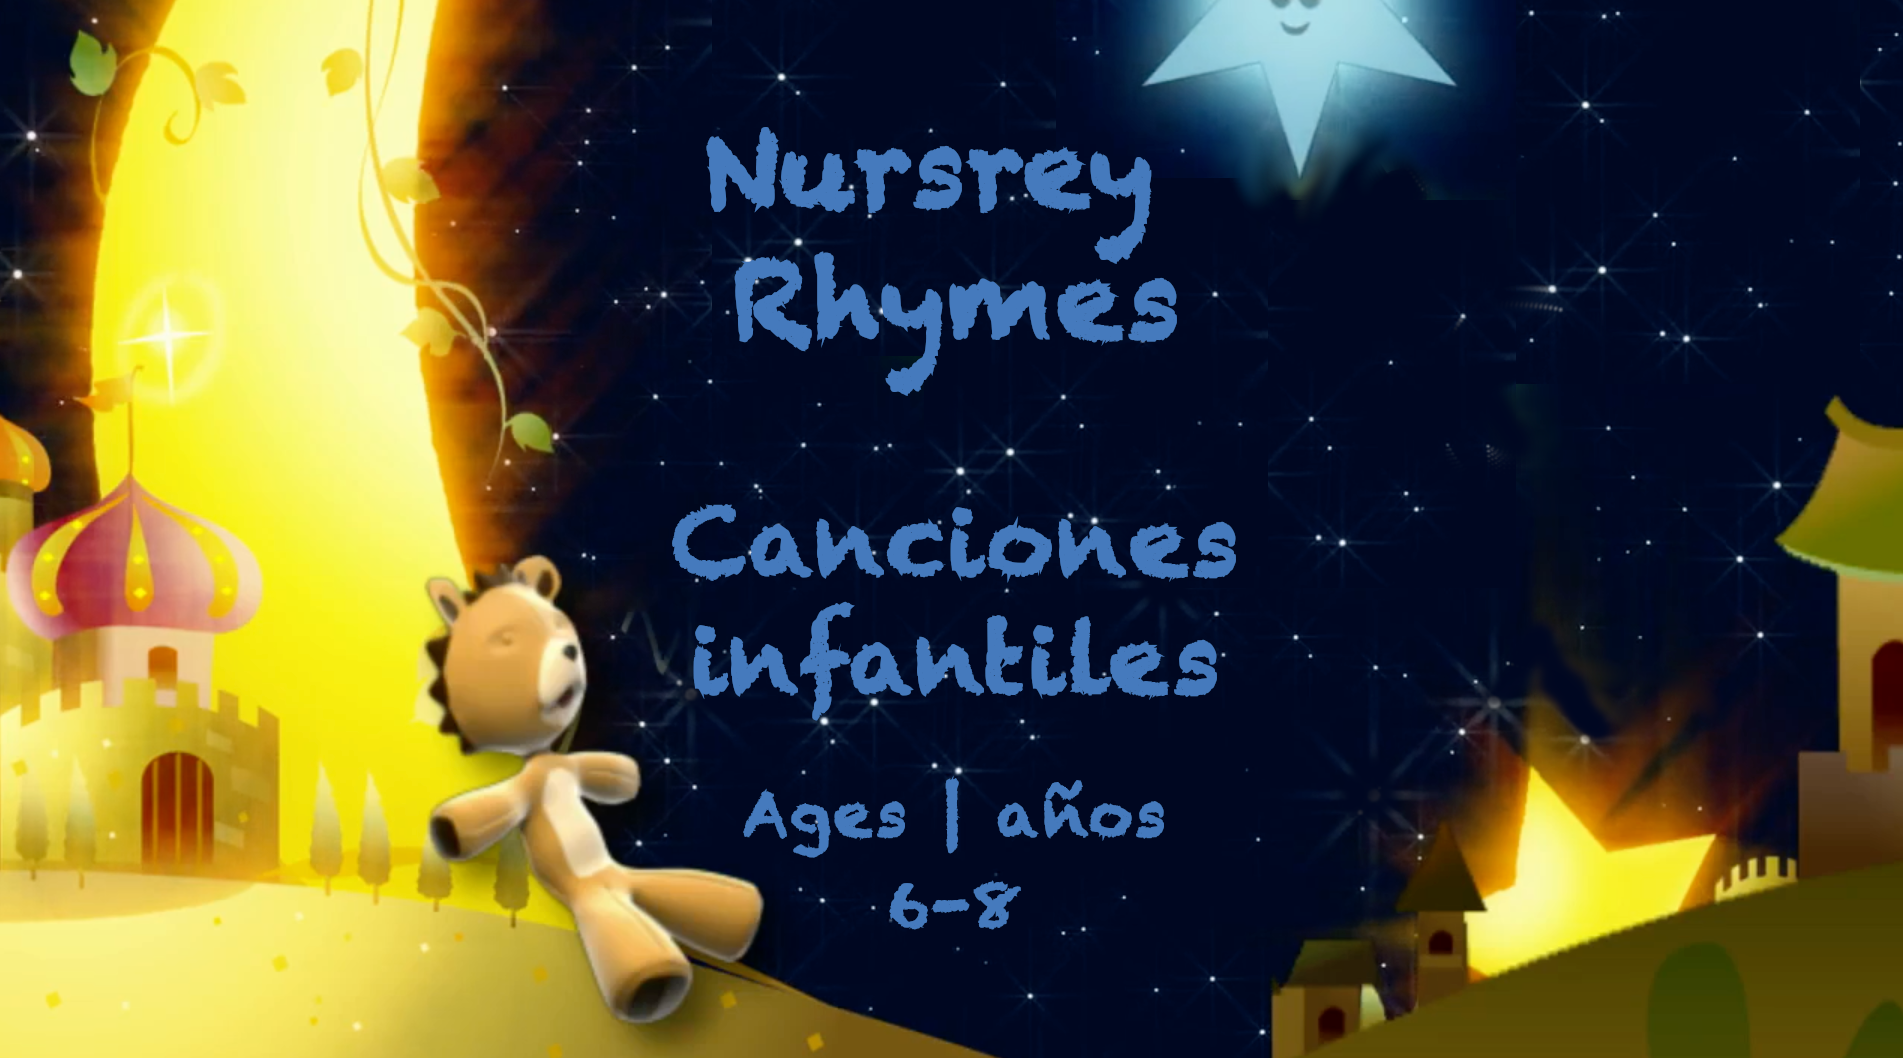 Nursery Rhymes for 6-8 year olds